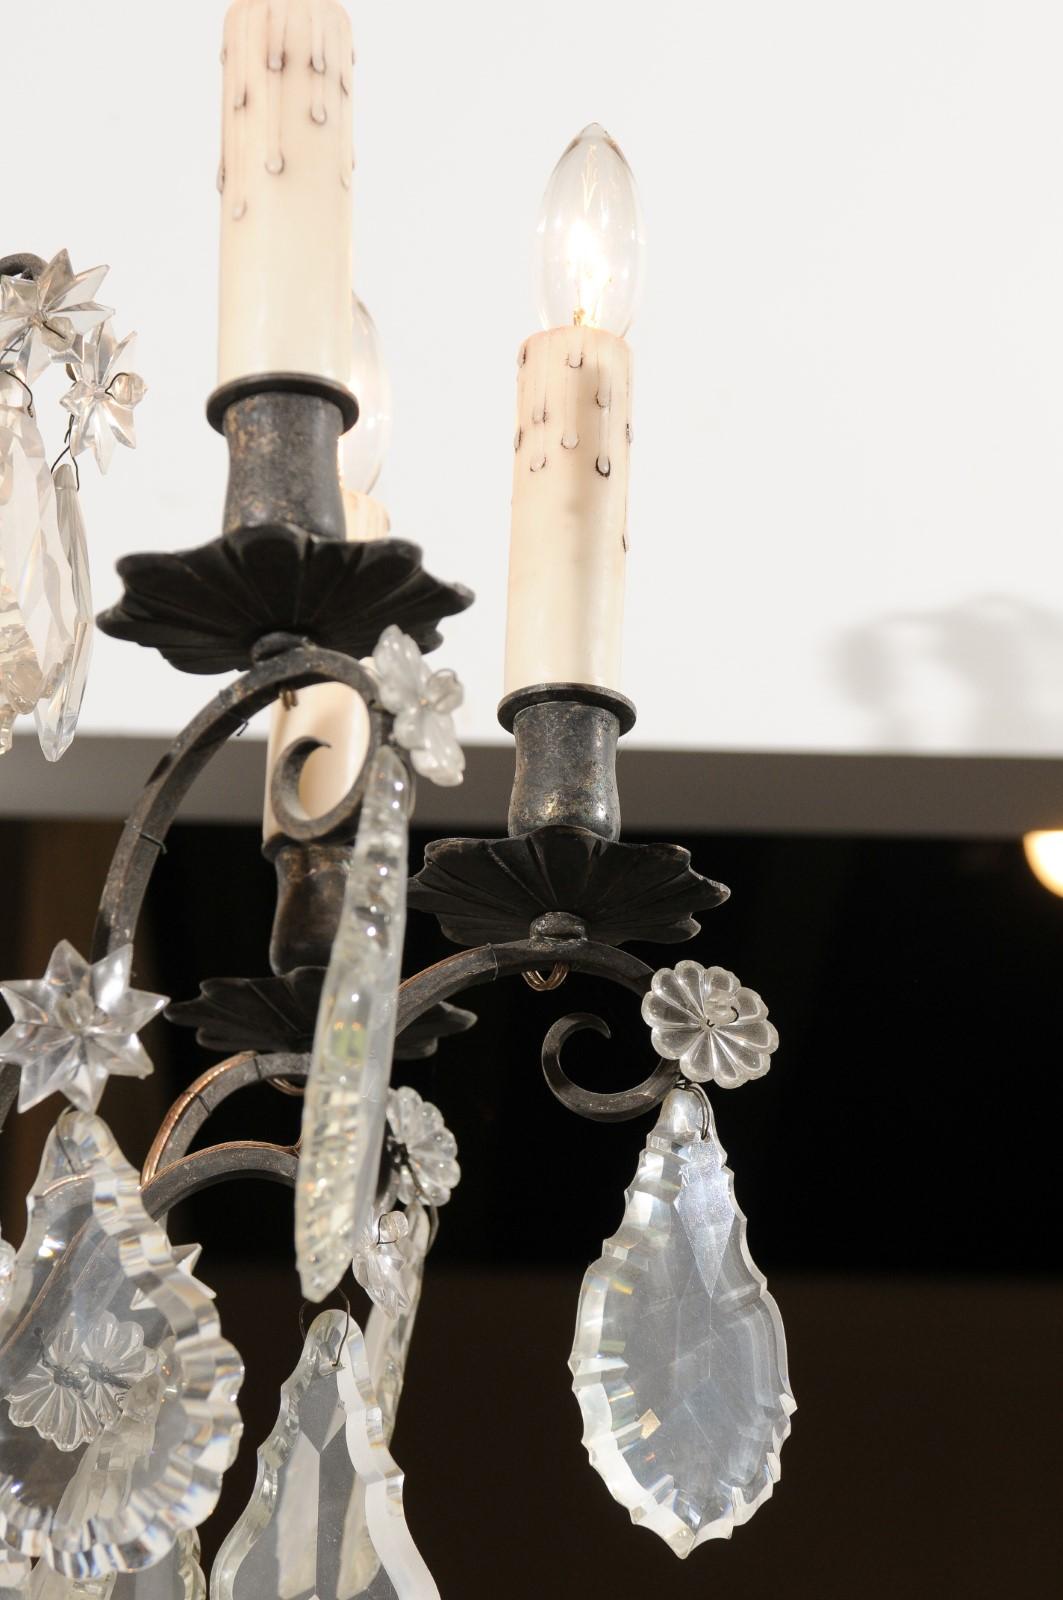 19th century crystal chandeliers